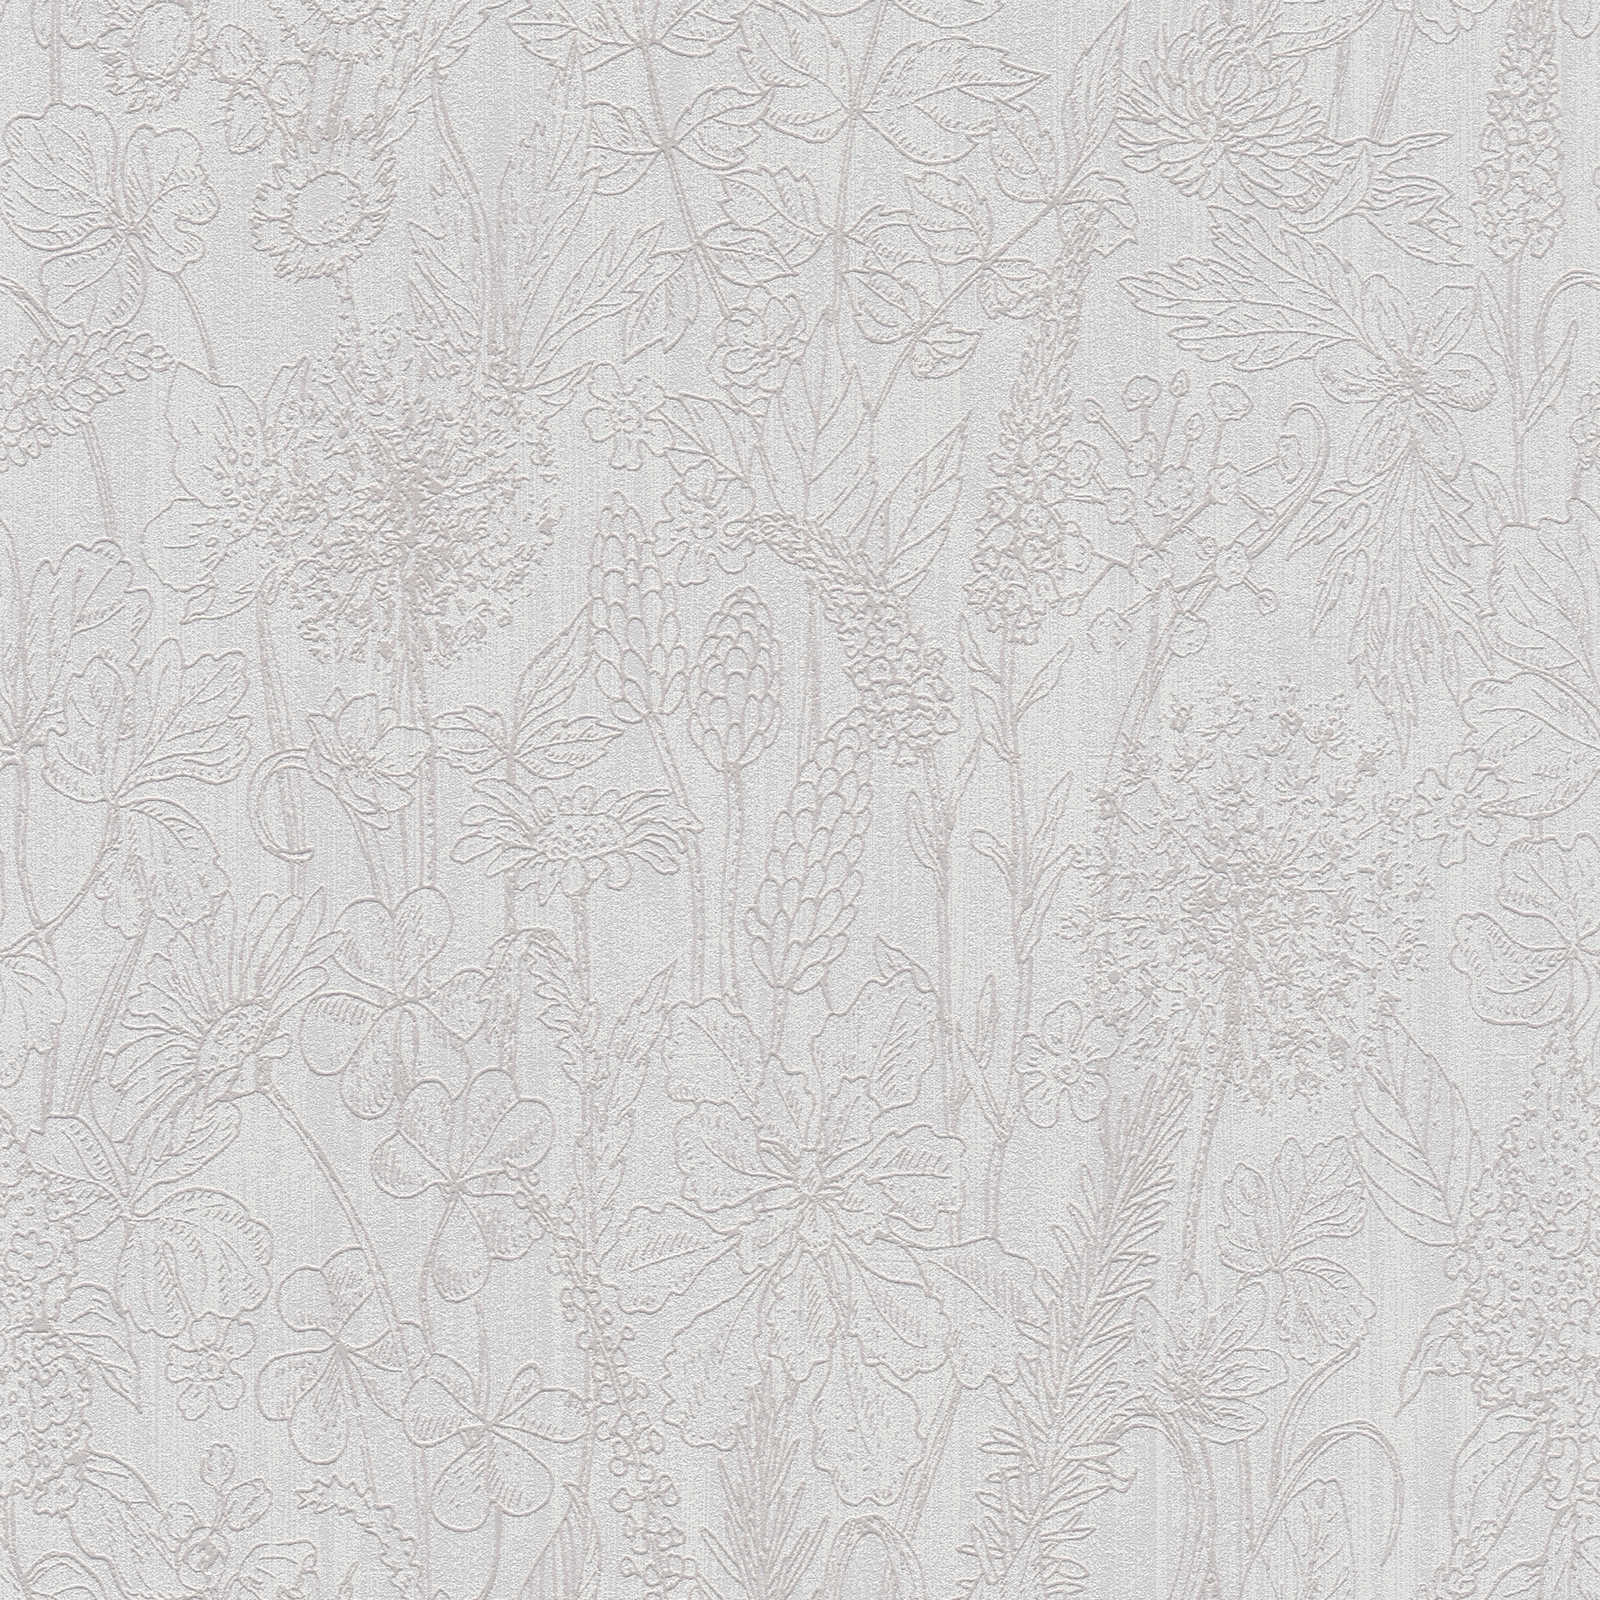 Flowers wallpaper botanical style with linen look - beige
